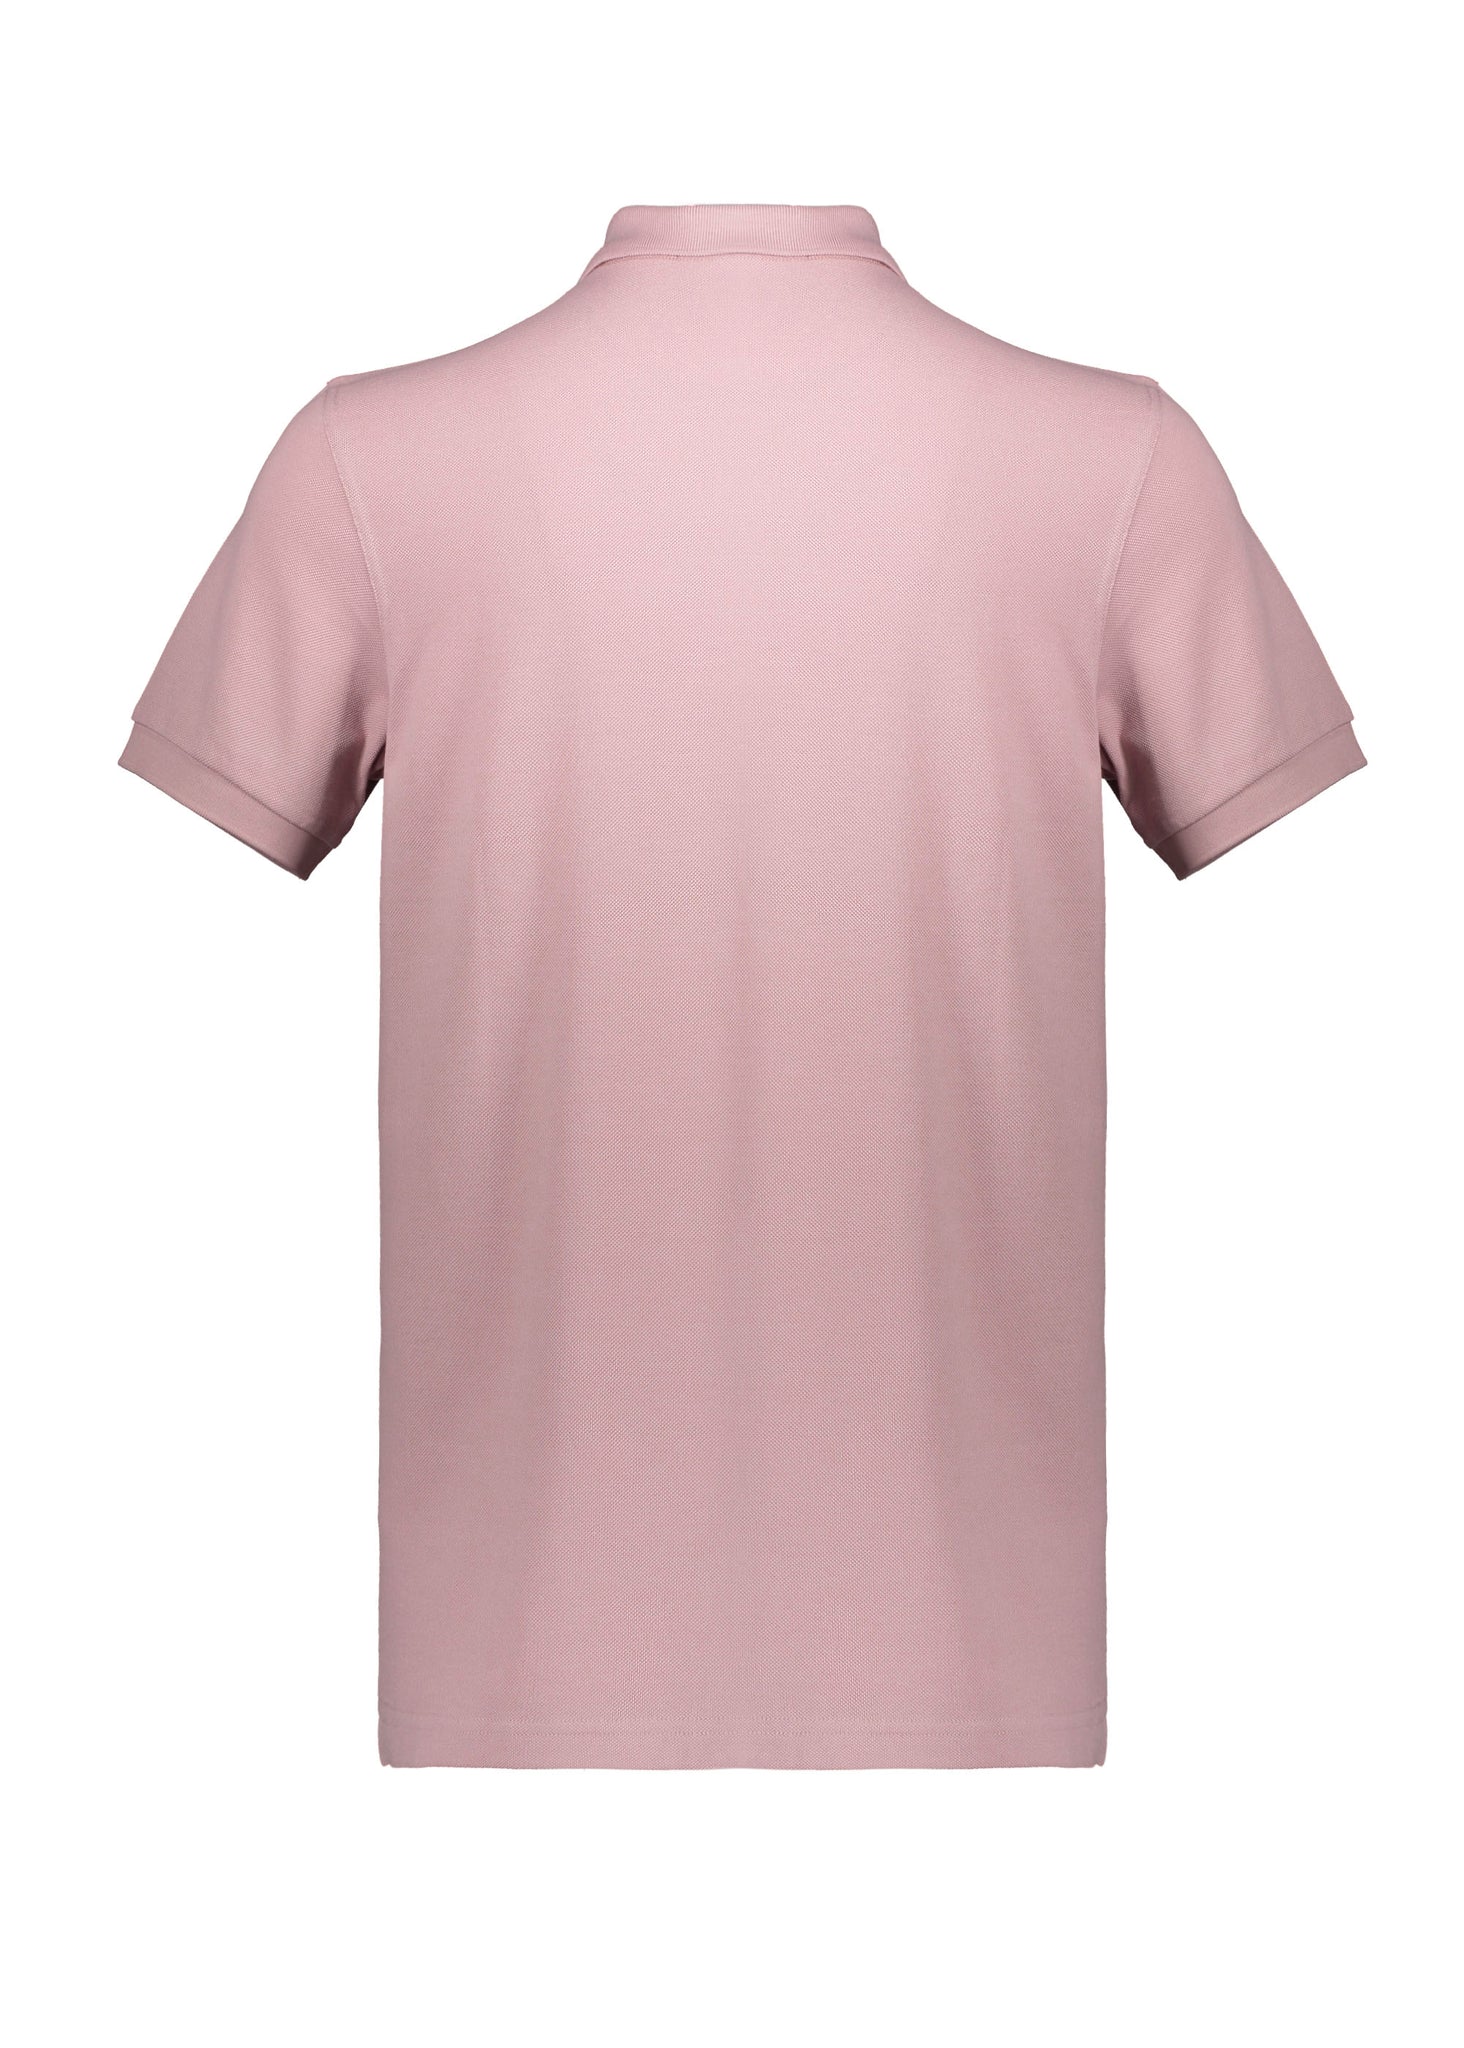 Fred Perry plain ss polo shirt - Dusty Rose